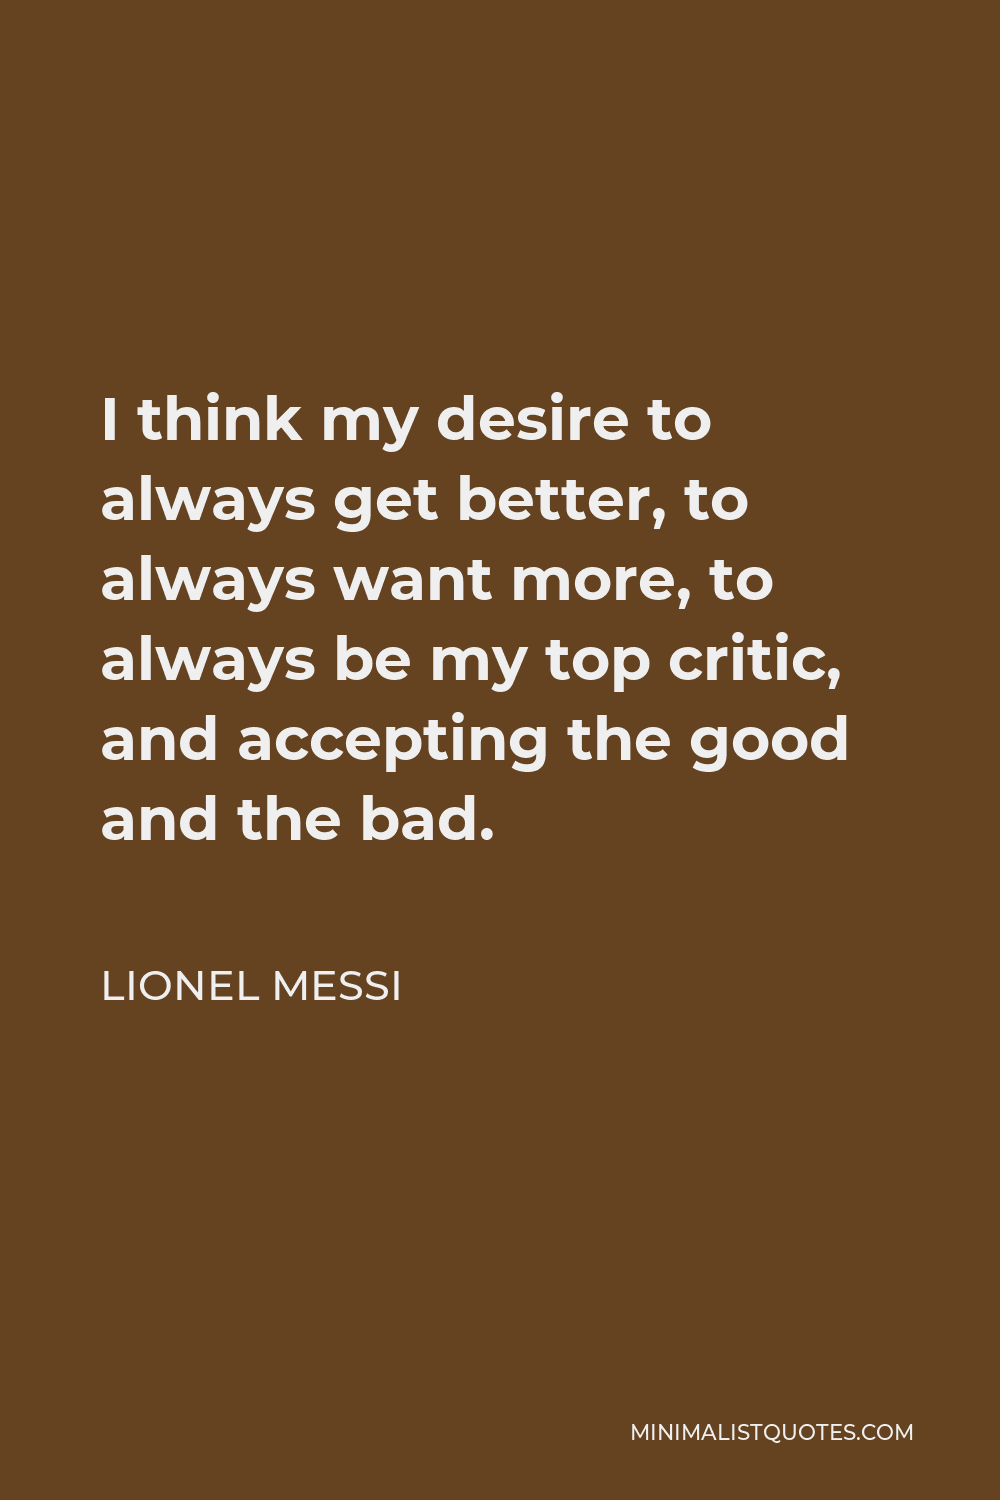 Lionel Messi Quote - I think my desire to always get better, to always want more, to always be my top critic, and accepting the good and the bad.